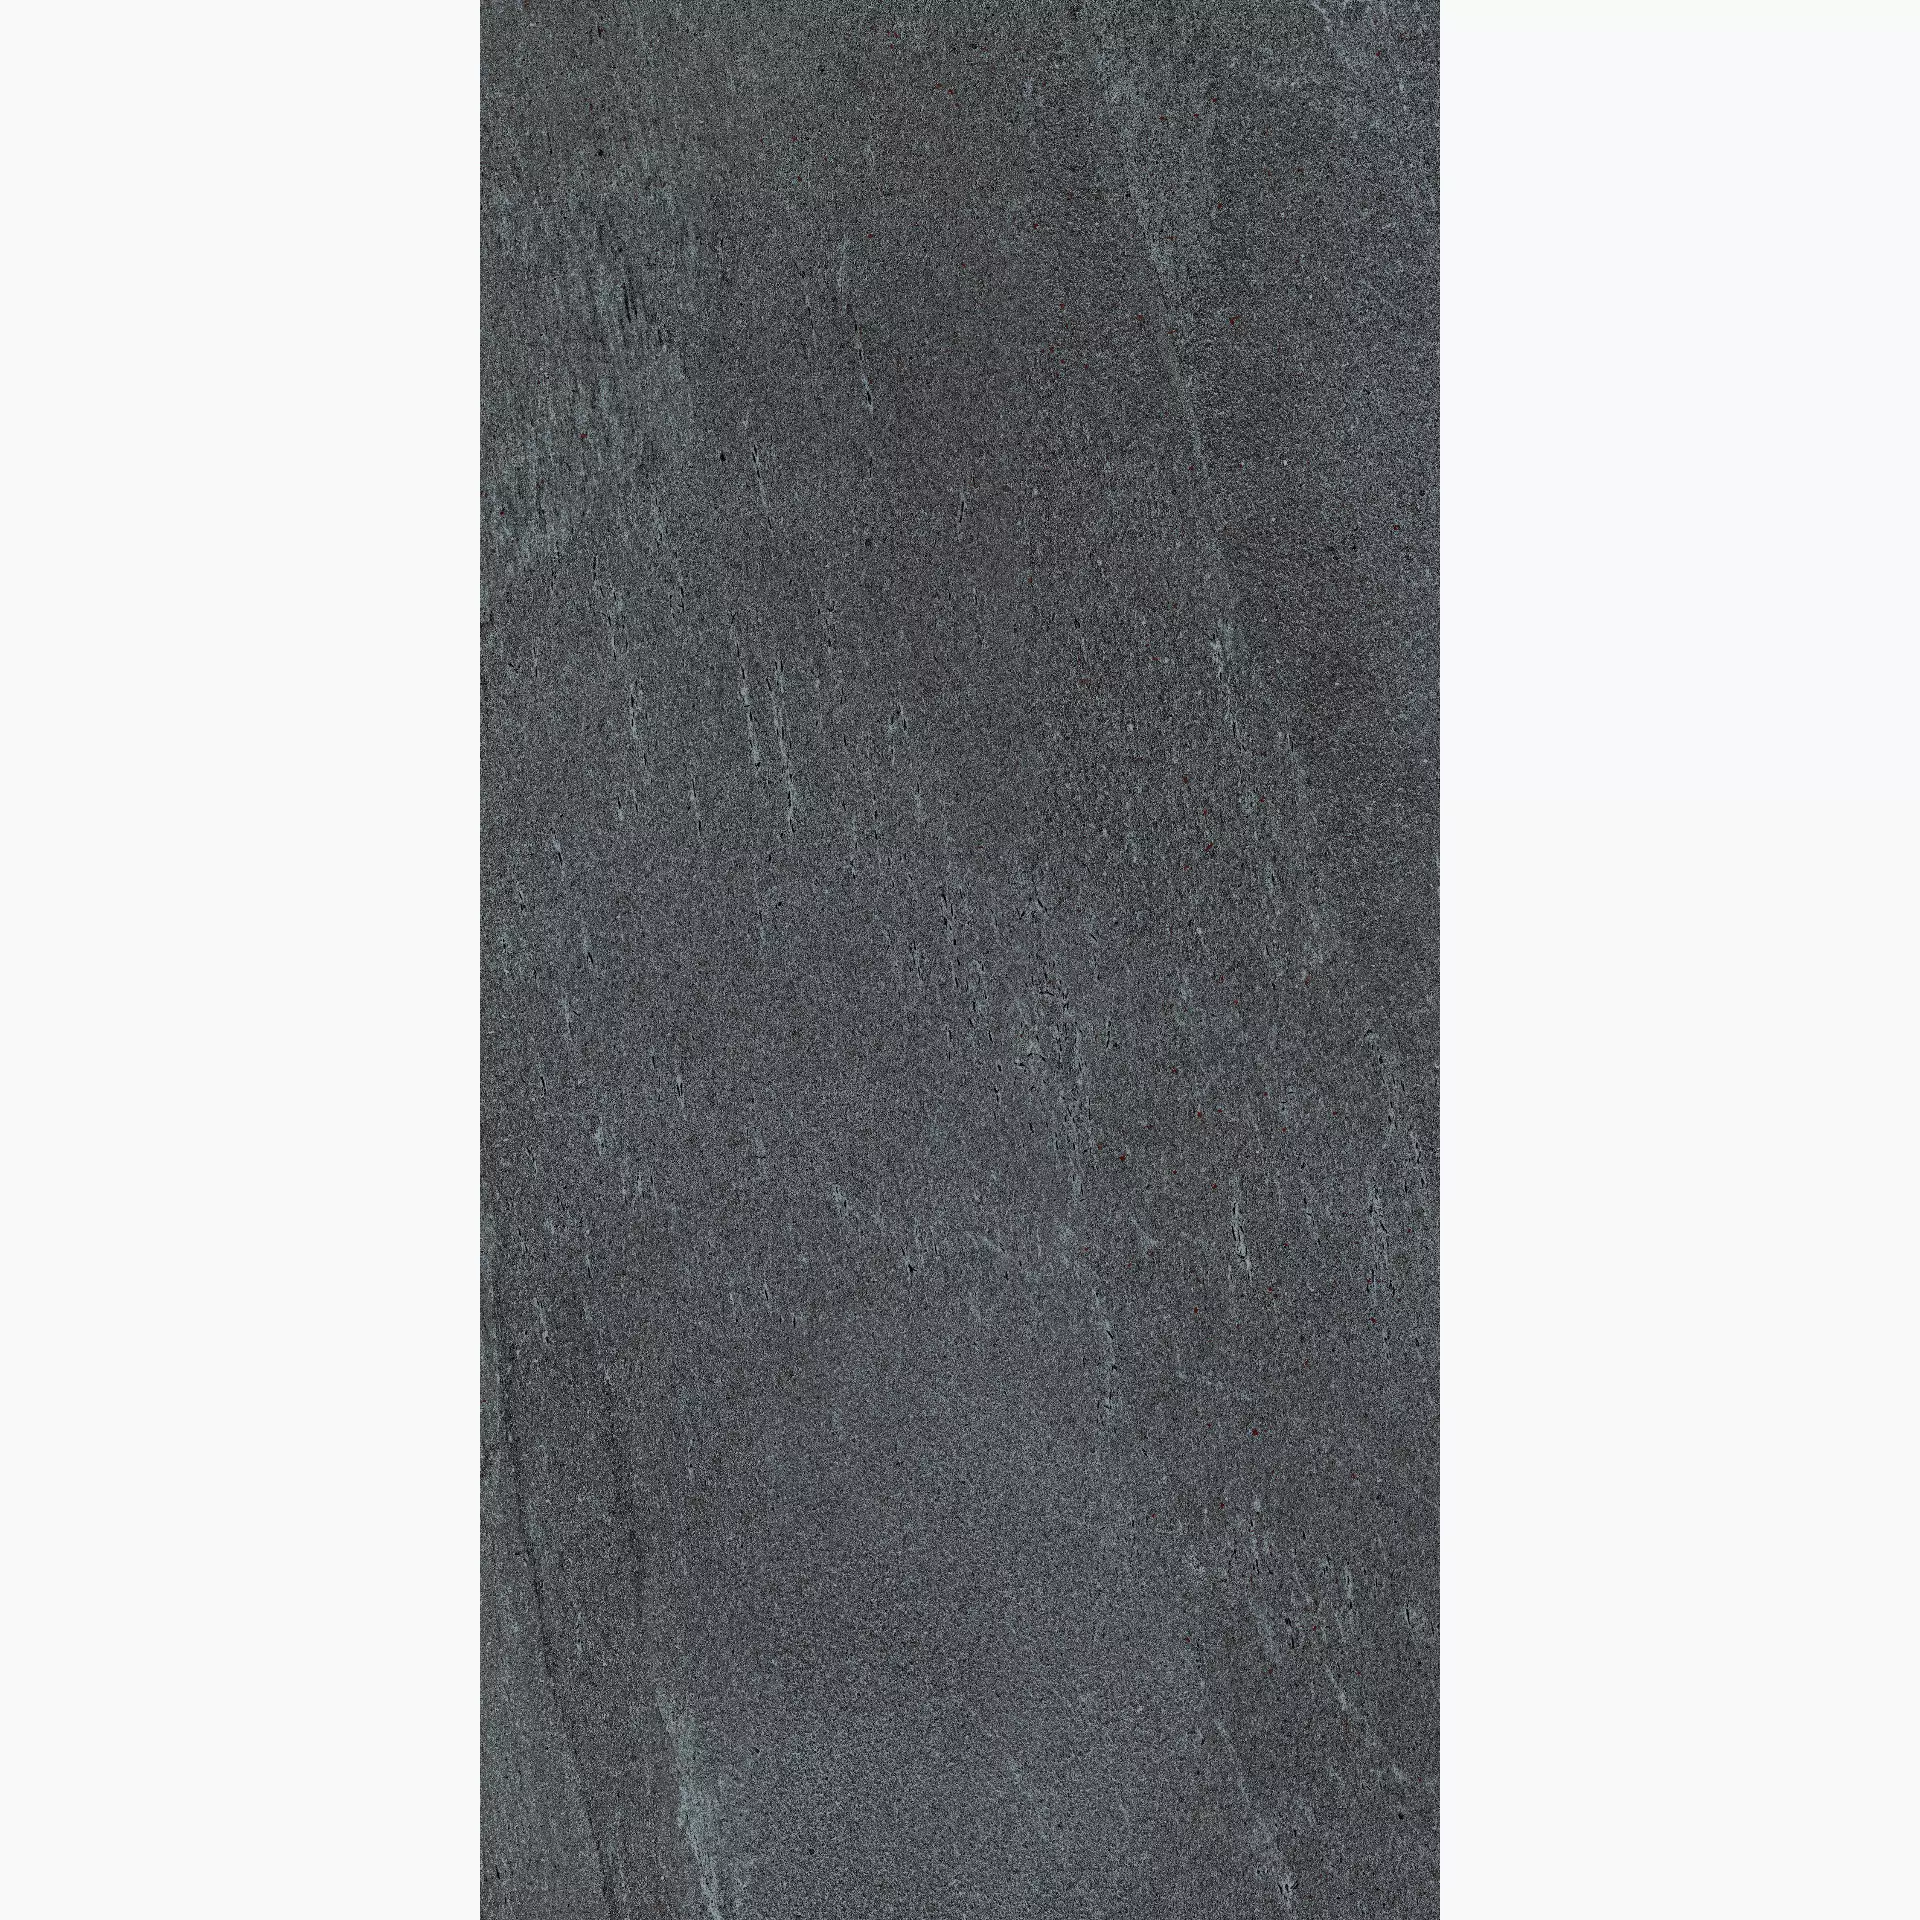 Cottodeste Blend Stone Deep Naturale Protect EGEBS10 90x180cm rectified 14mm